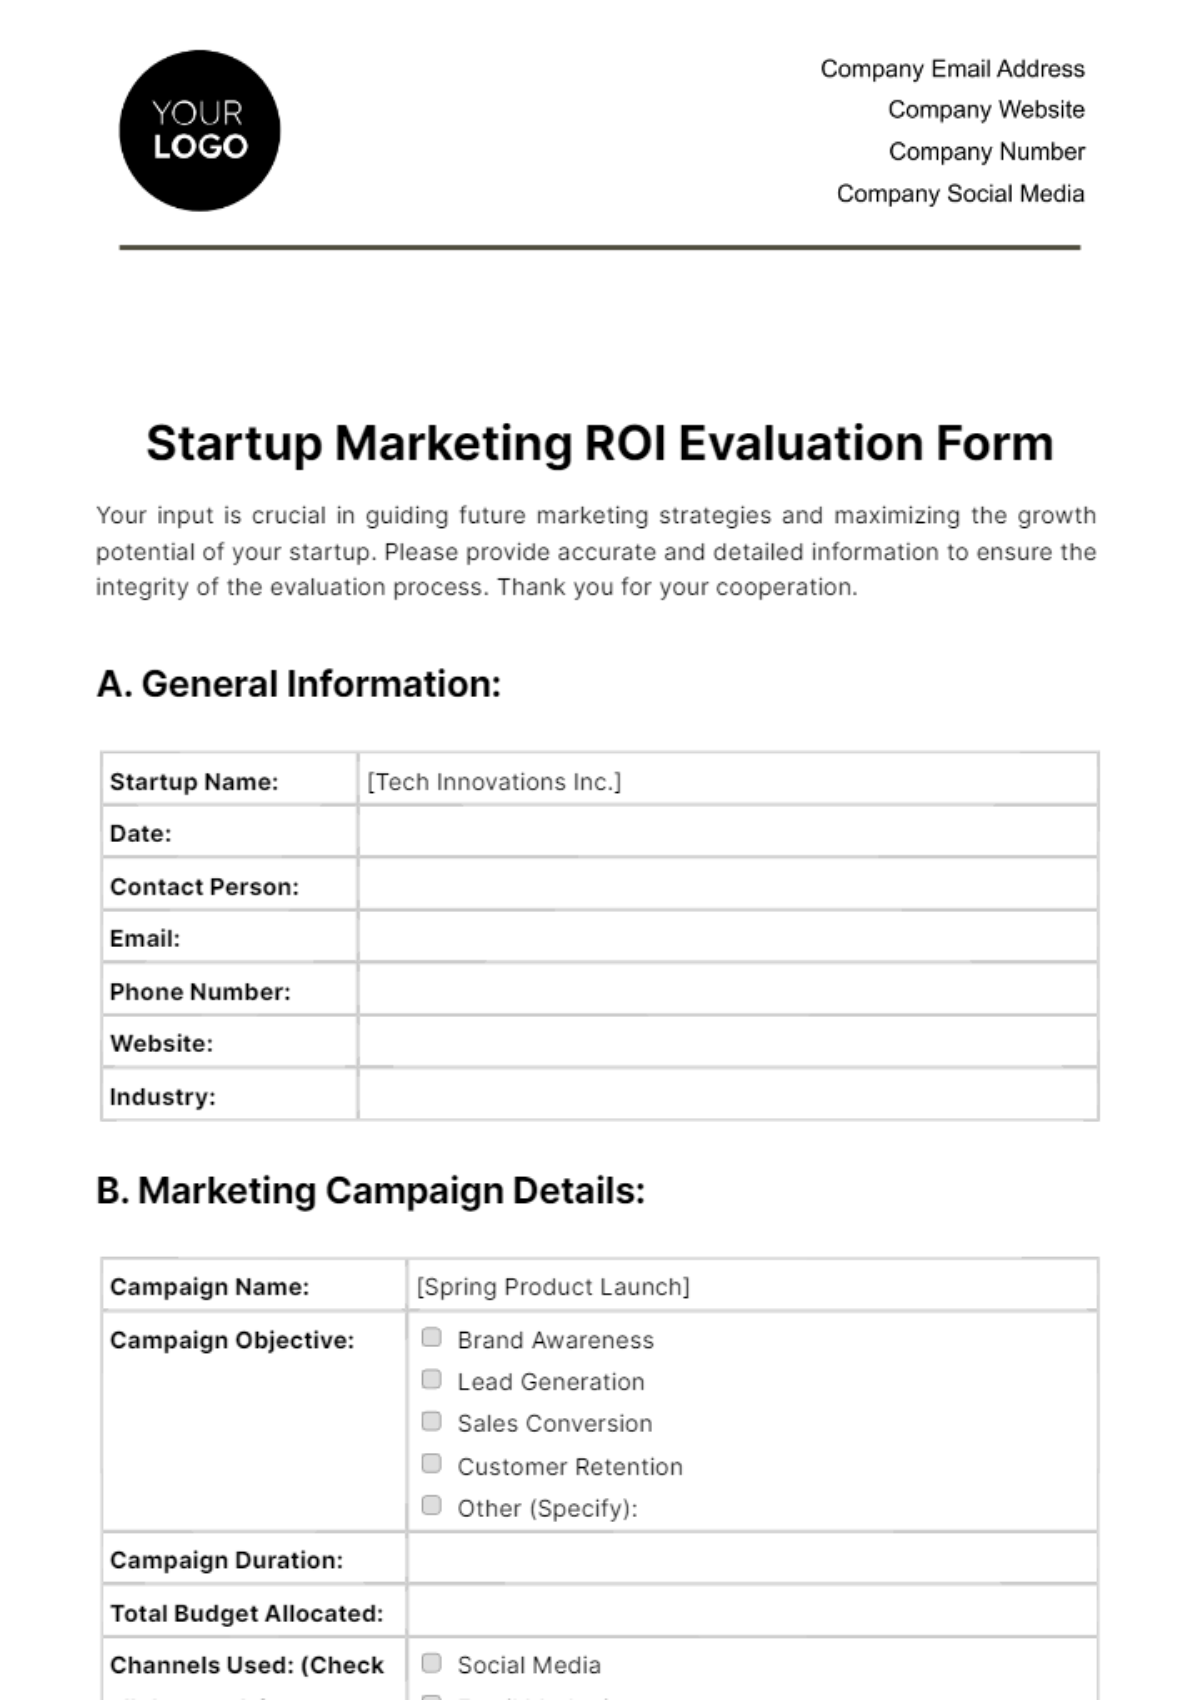 Startup Marketing ROI Evaluation Form Template